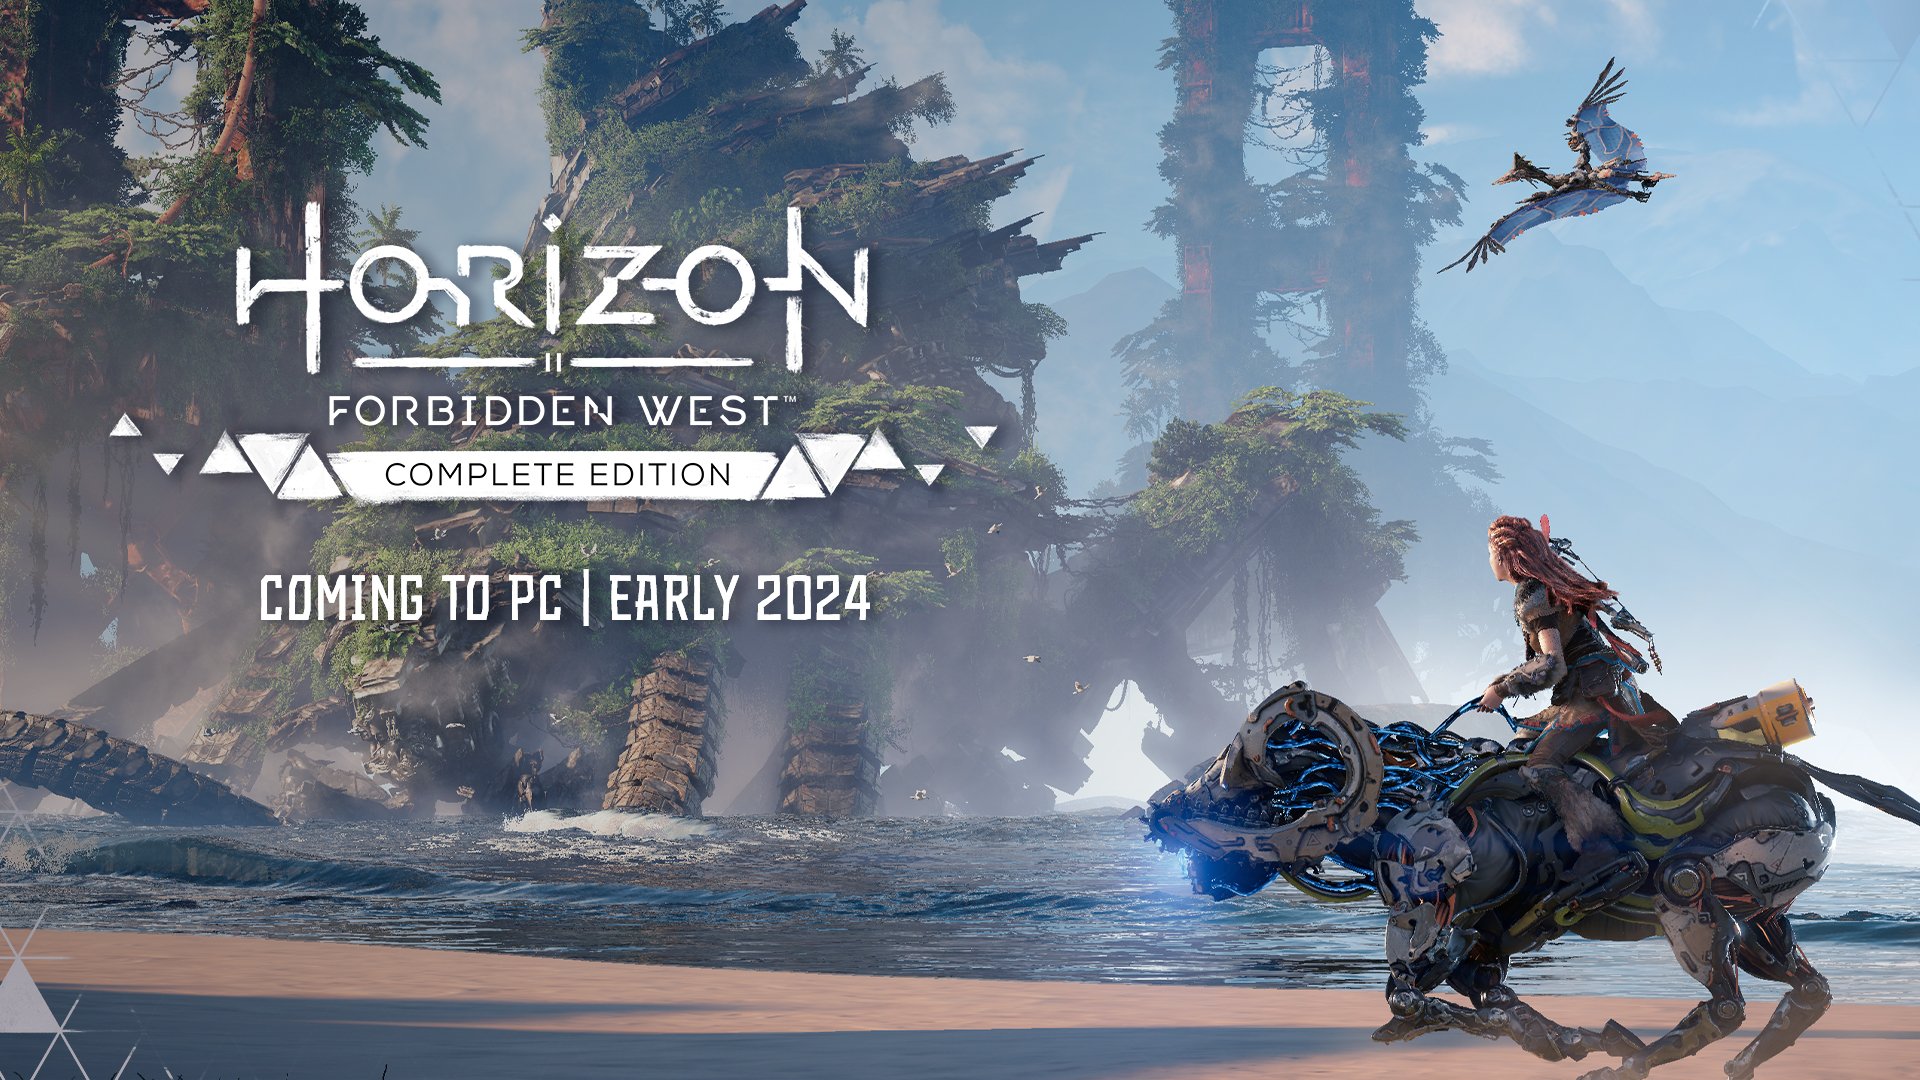 Horizon Forbidden West: Complete Edition Is Heading to PS5 and PC